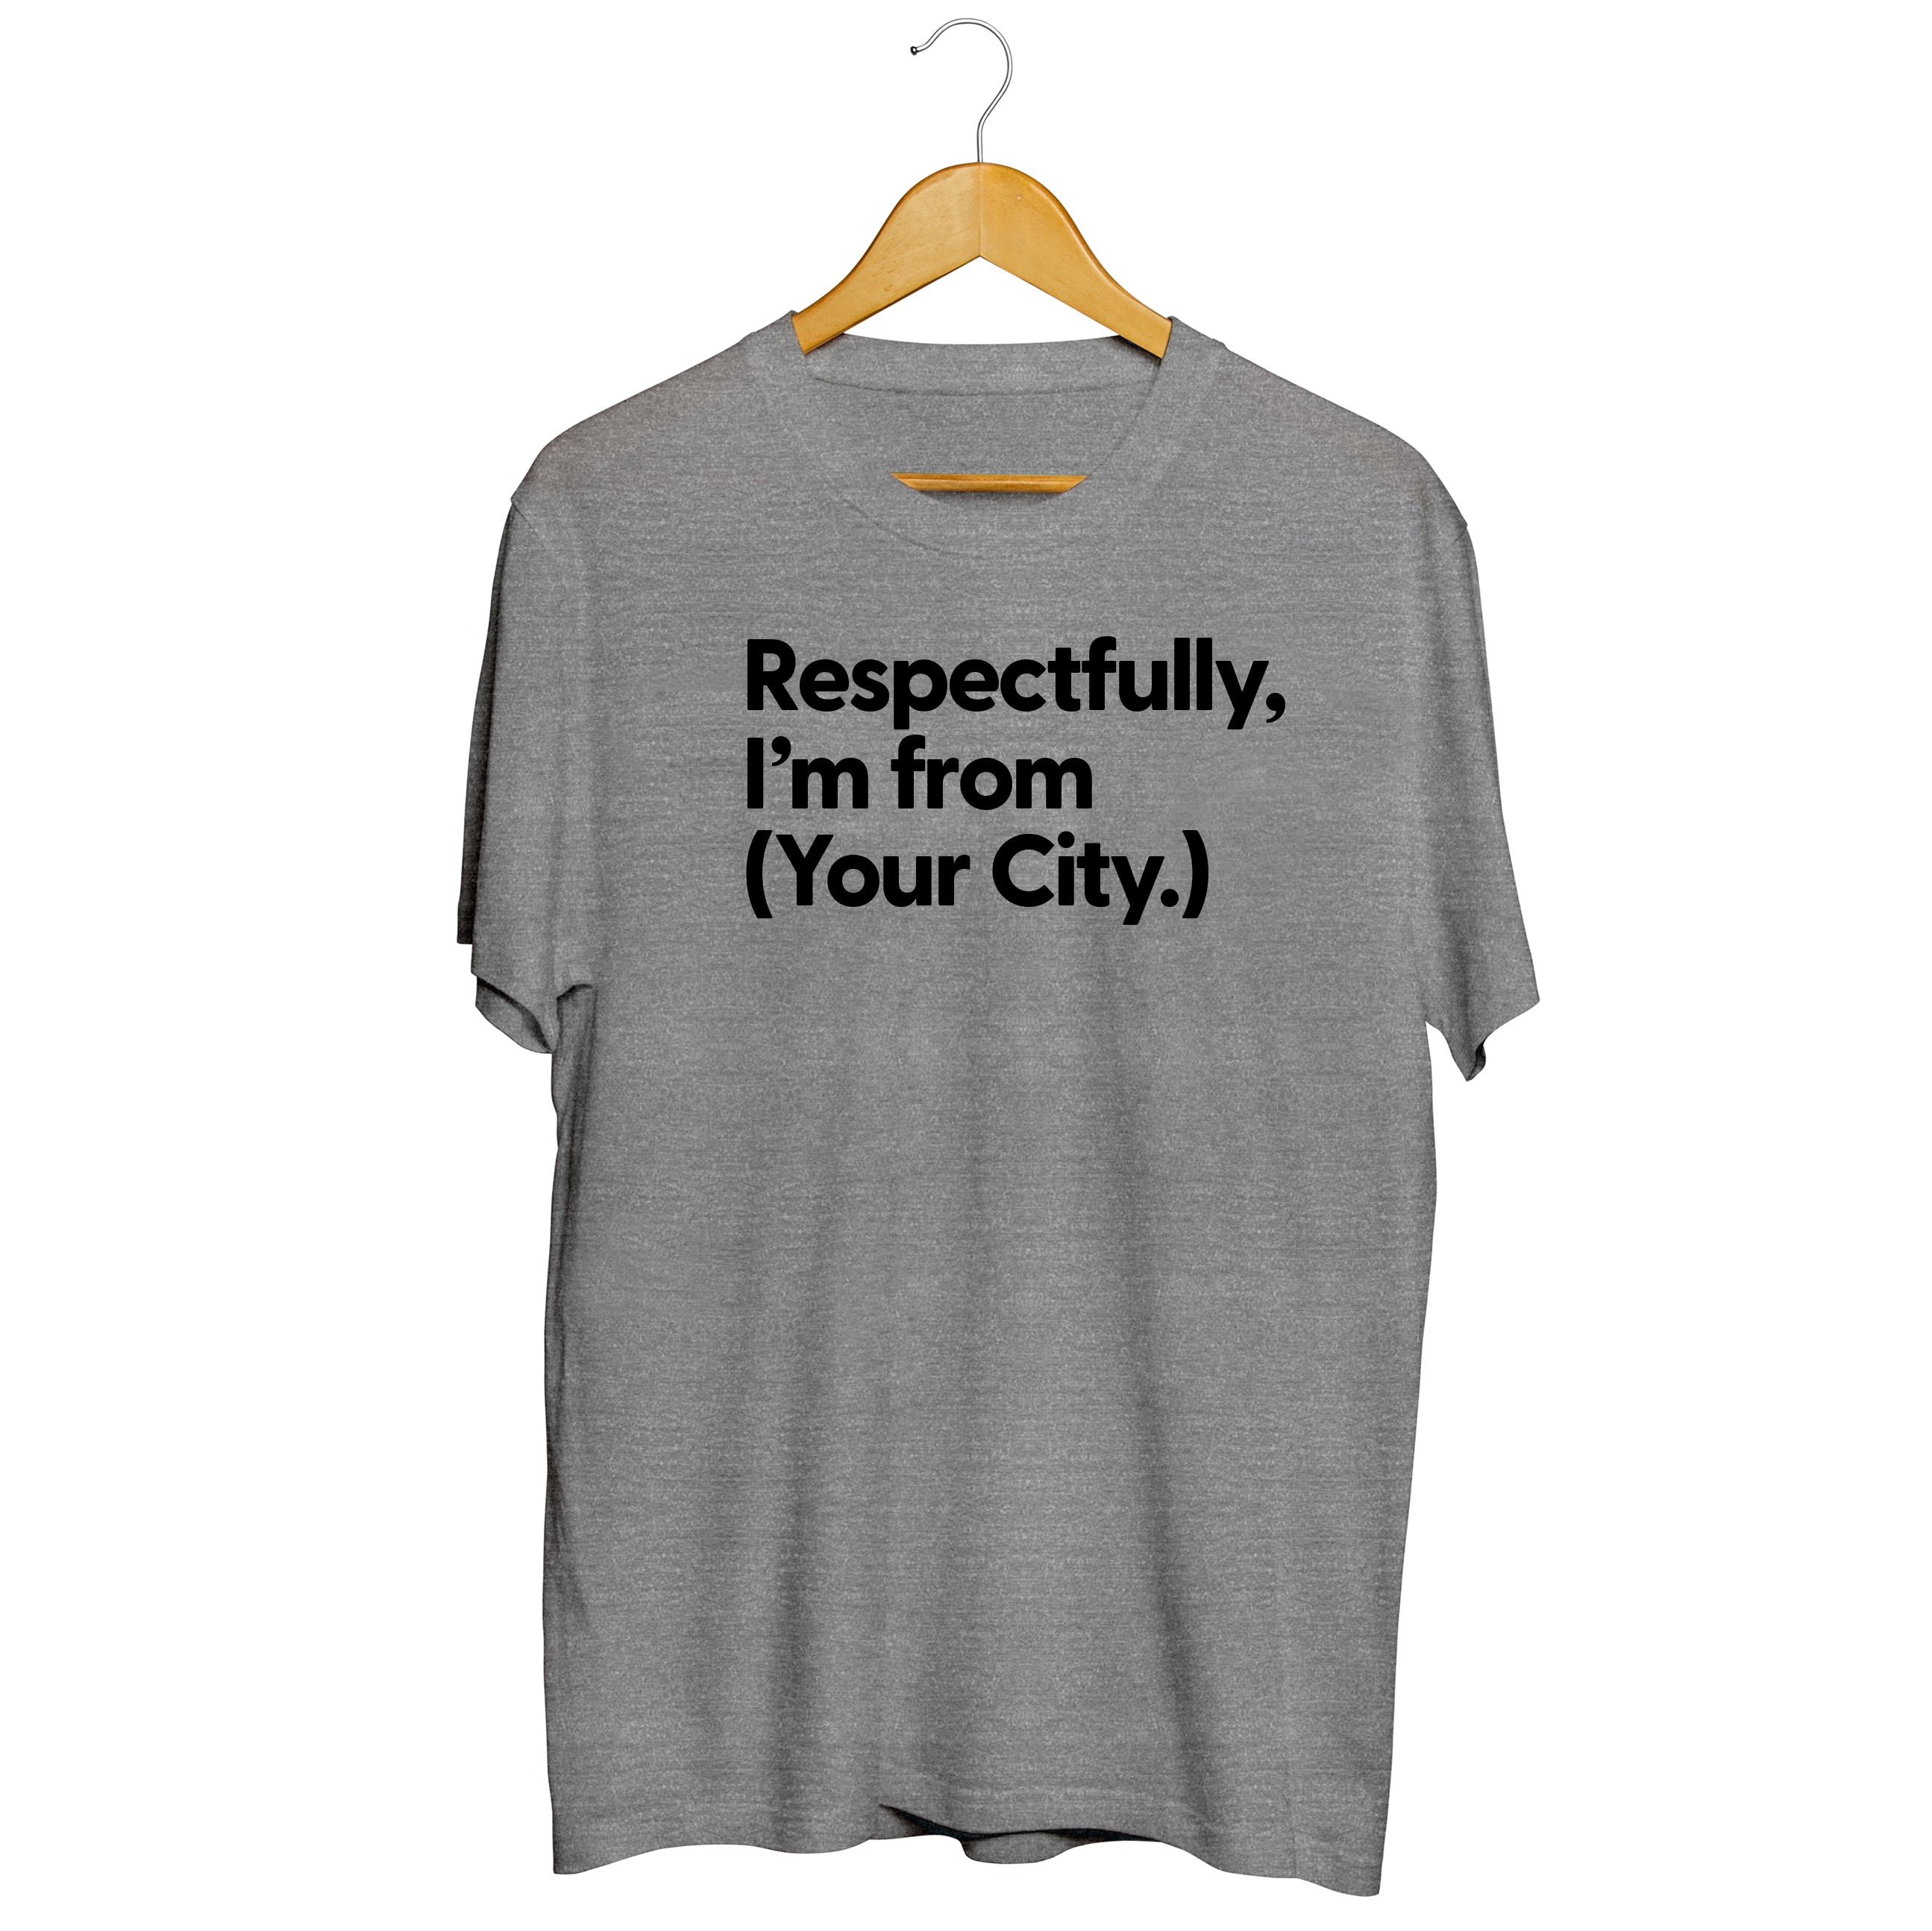 Respectfully from Your City